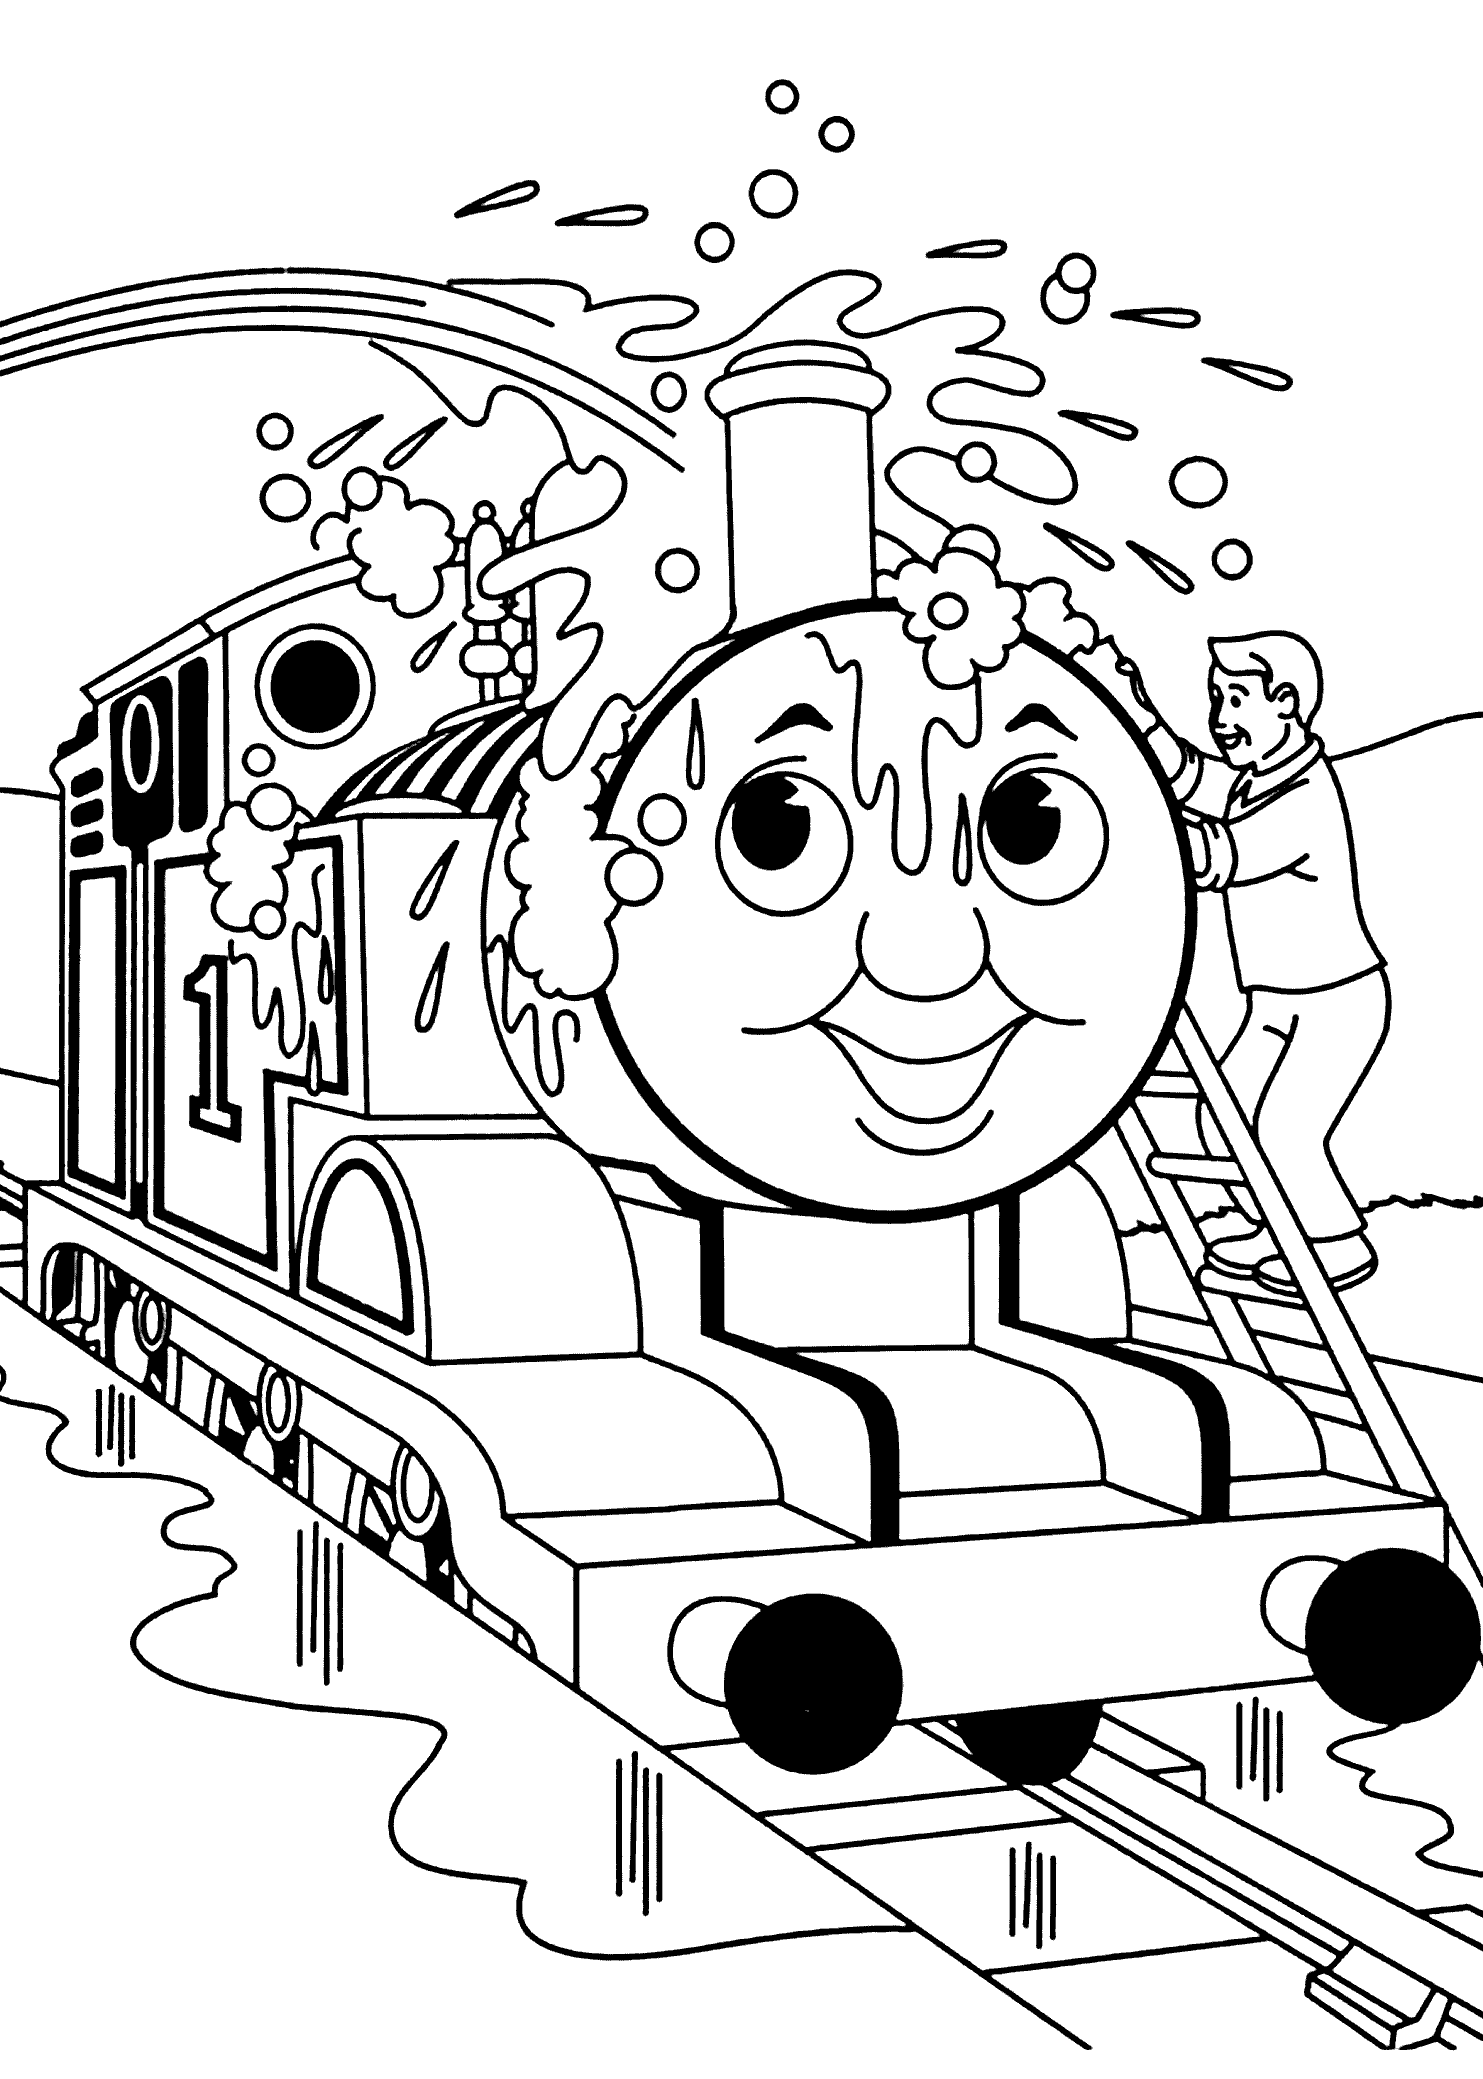 Thomas Coloring Pages - FREE Printable Coloring Pages | AngelDesign